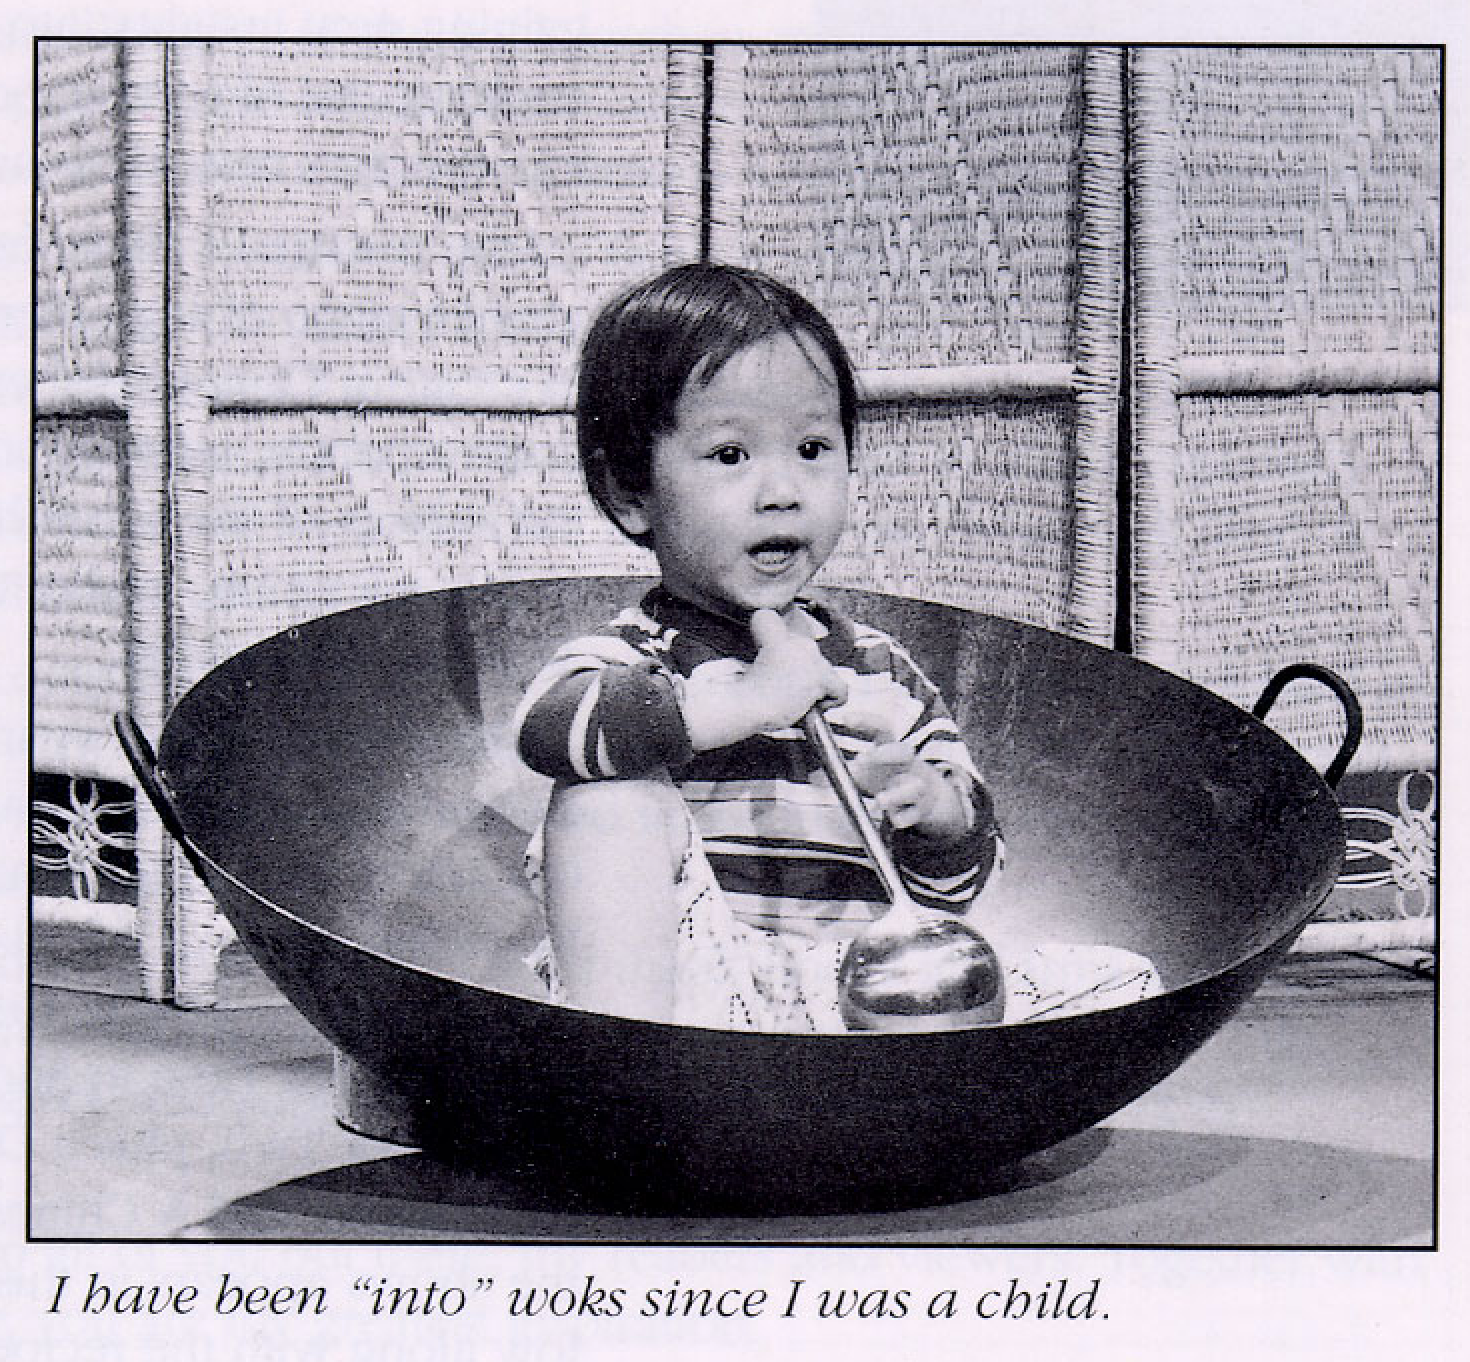 Little Chef in the Wok, 1950